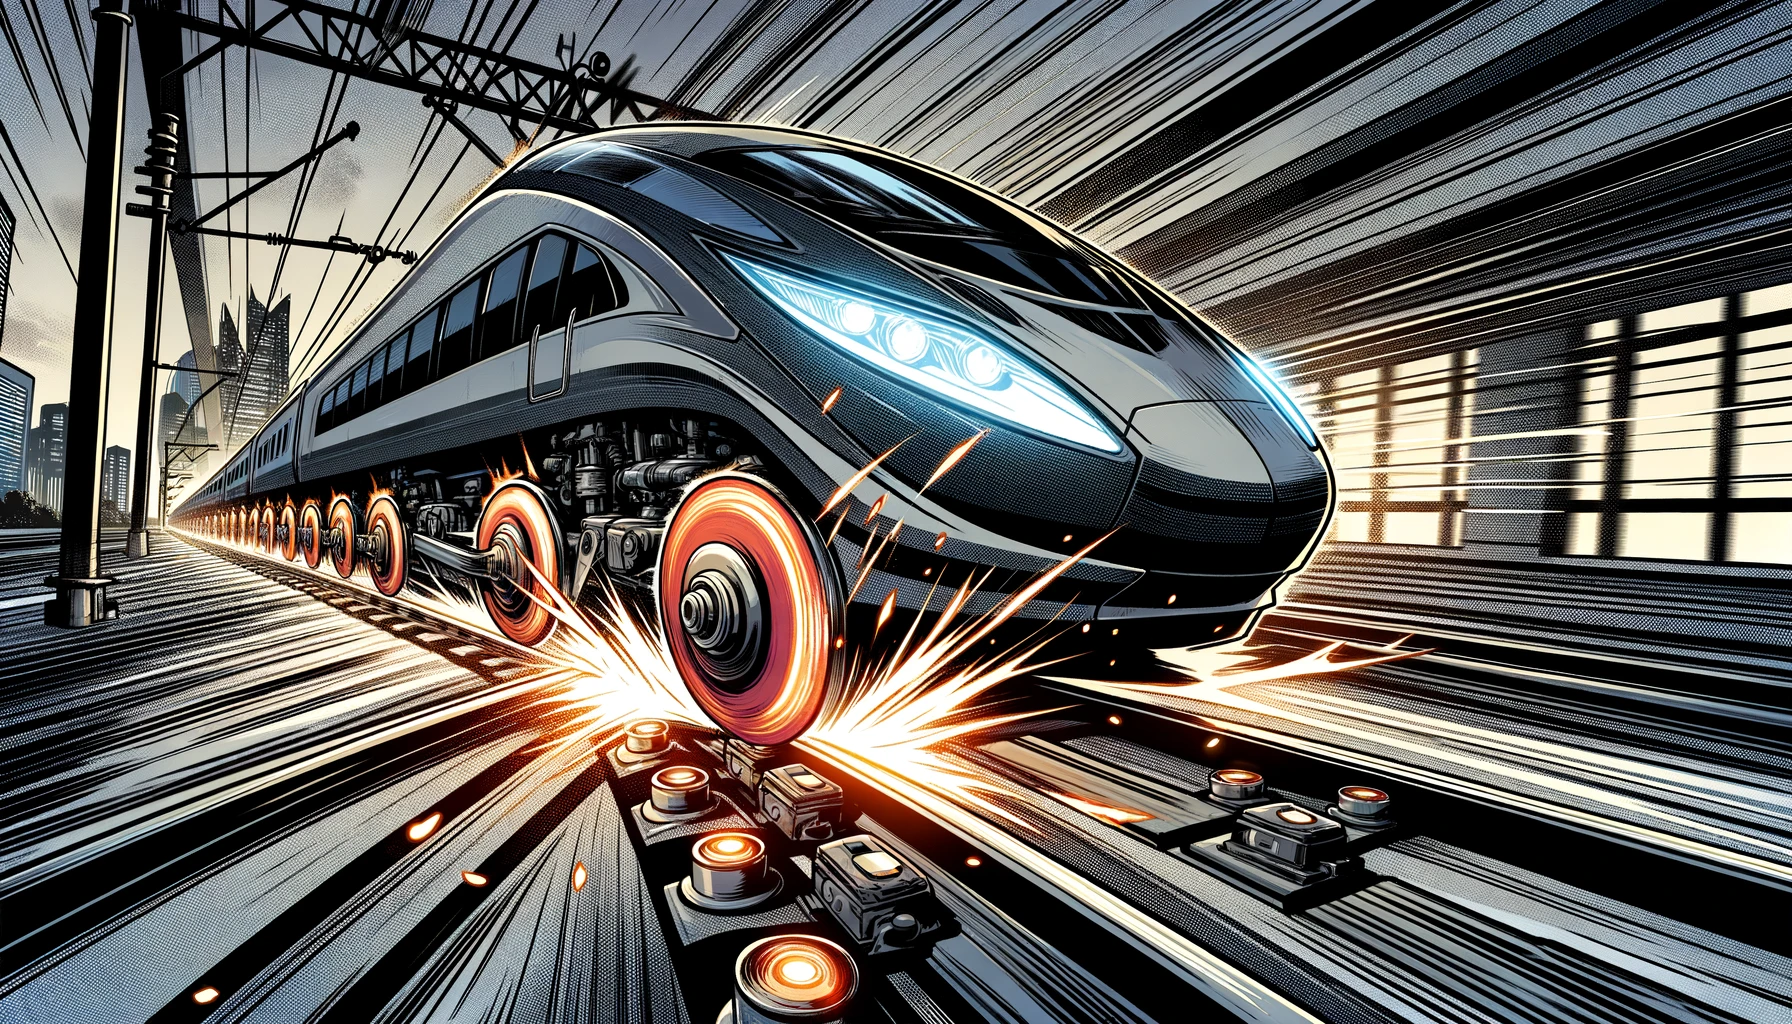 Sepiolite: A new component suitable for 380 km/h high-speed rail brake pads